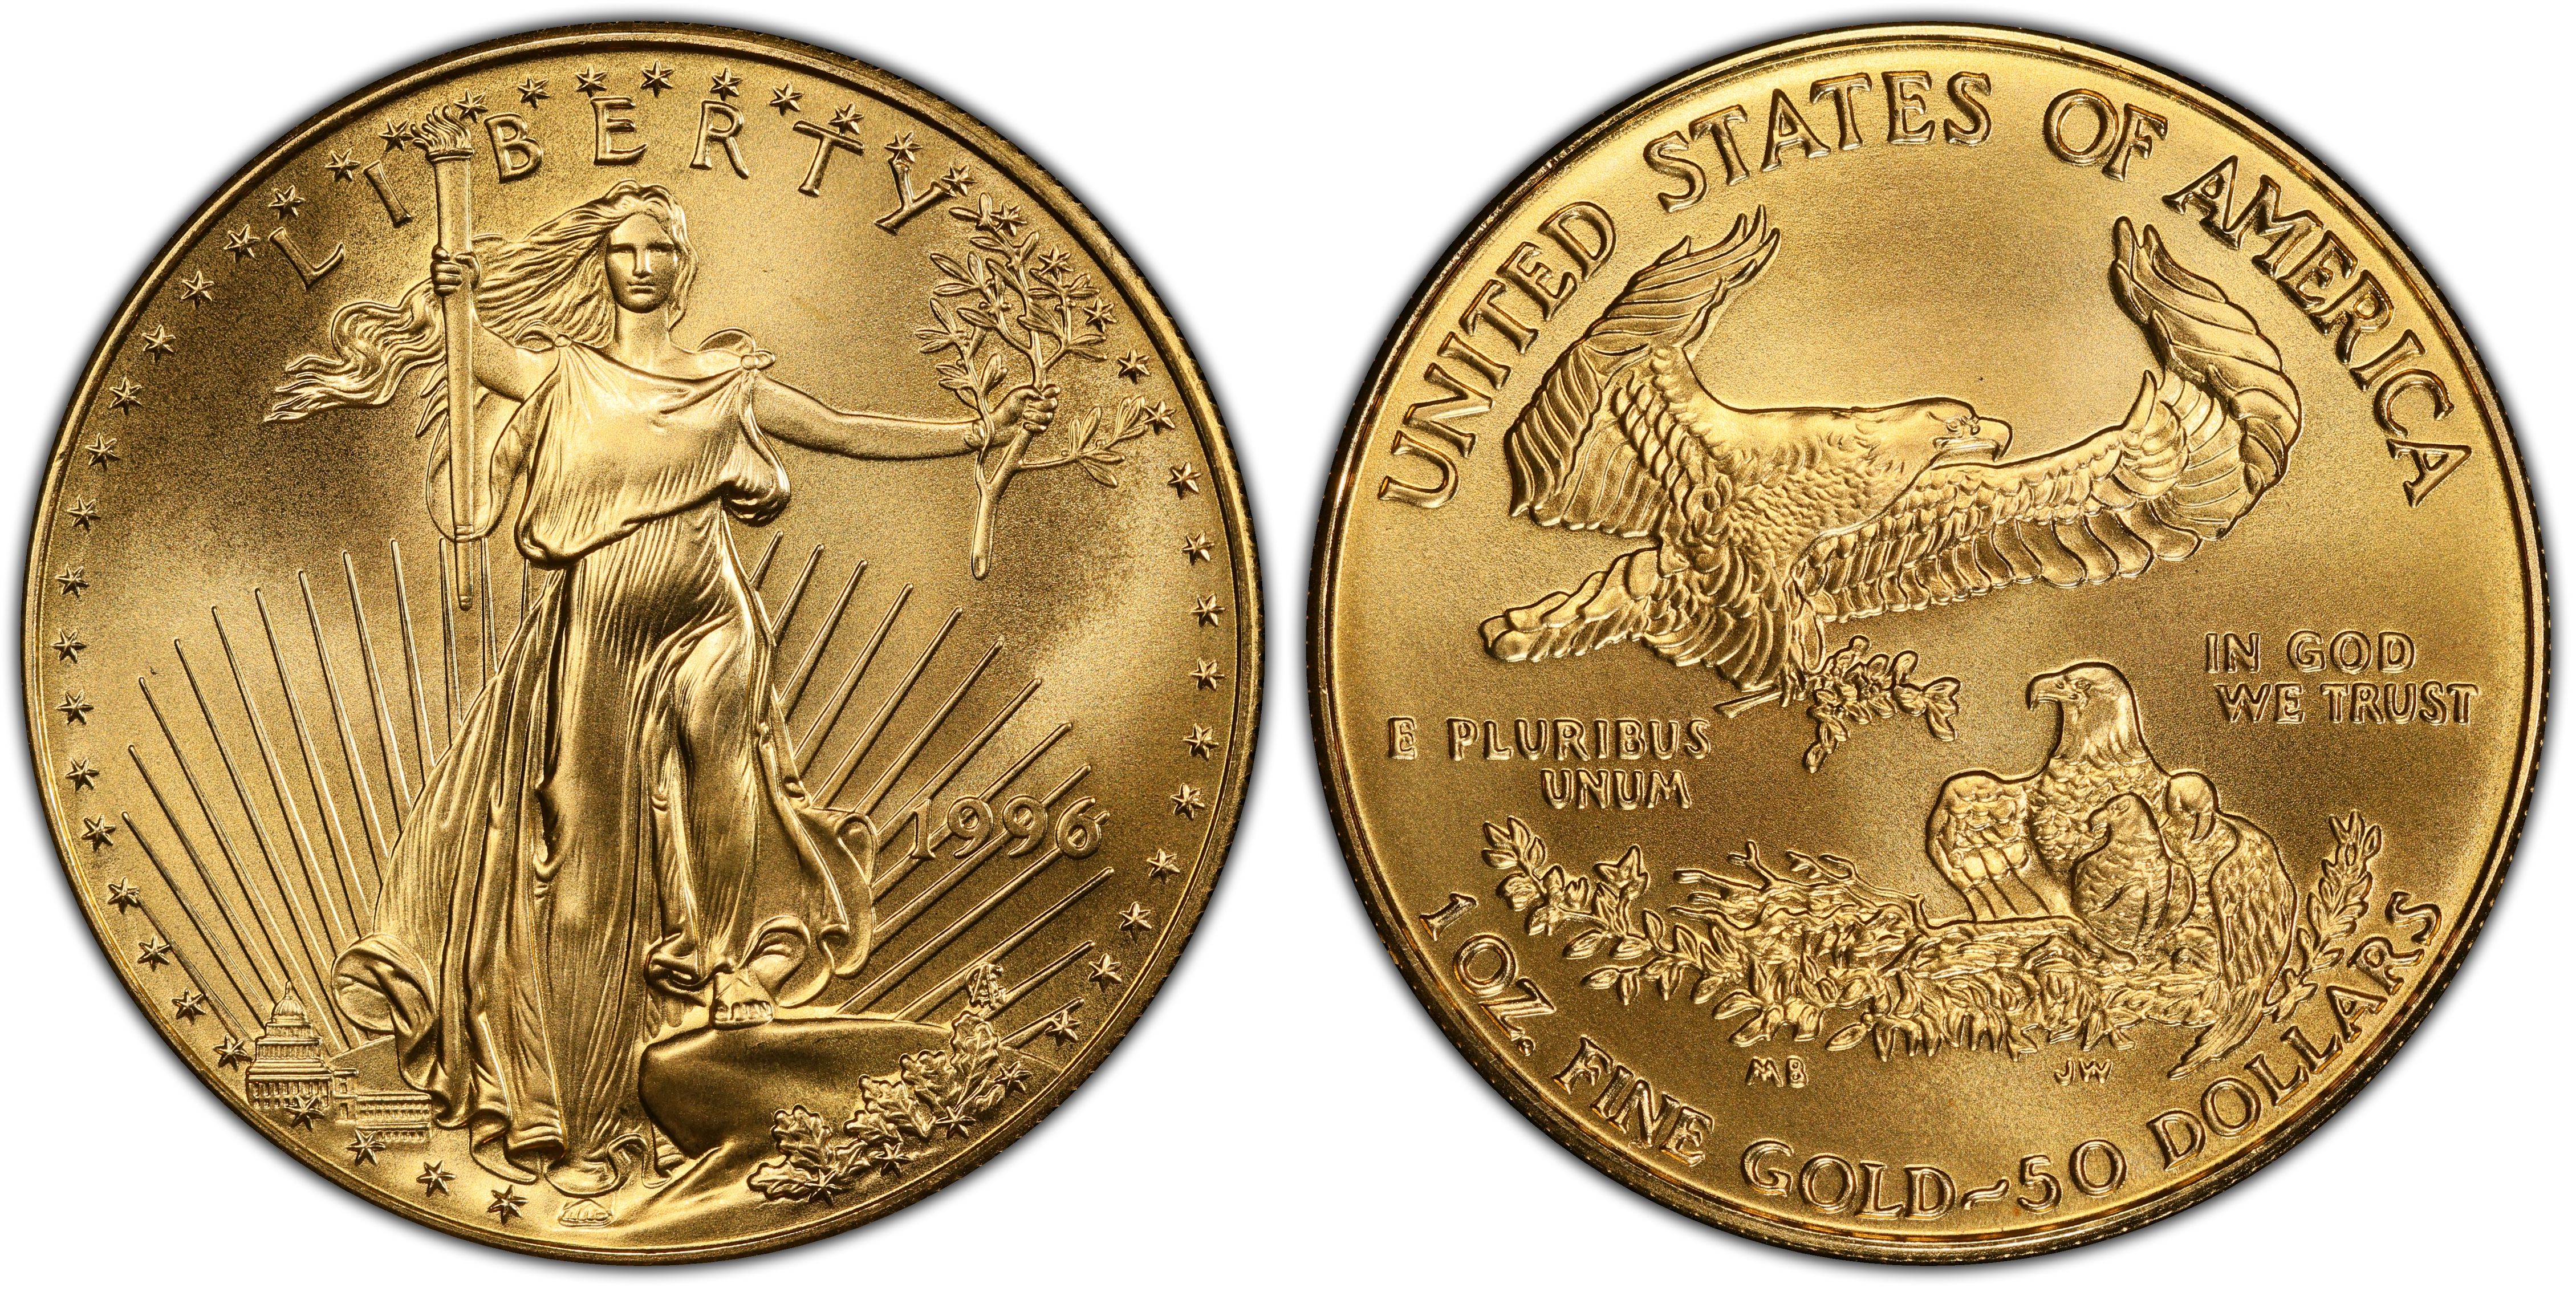 1996 $50 Gold Eagle (Regular Strike) Gold Eagles - PCGS CoinFacts